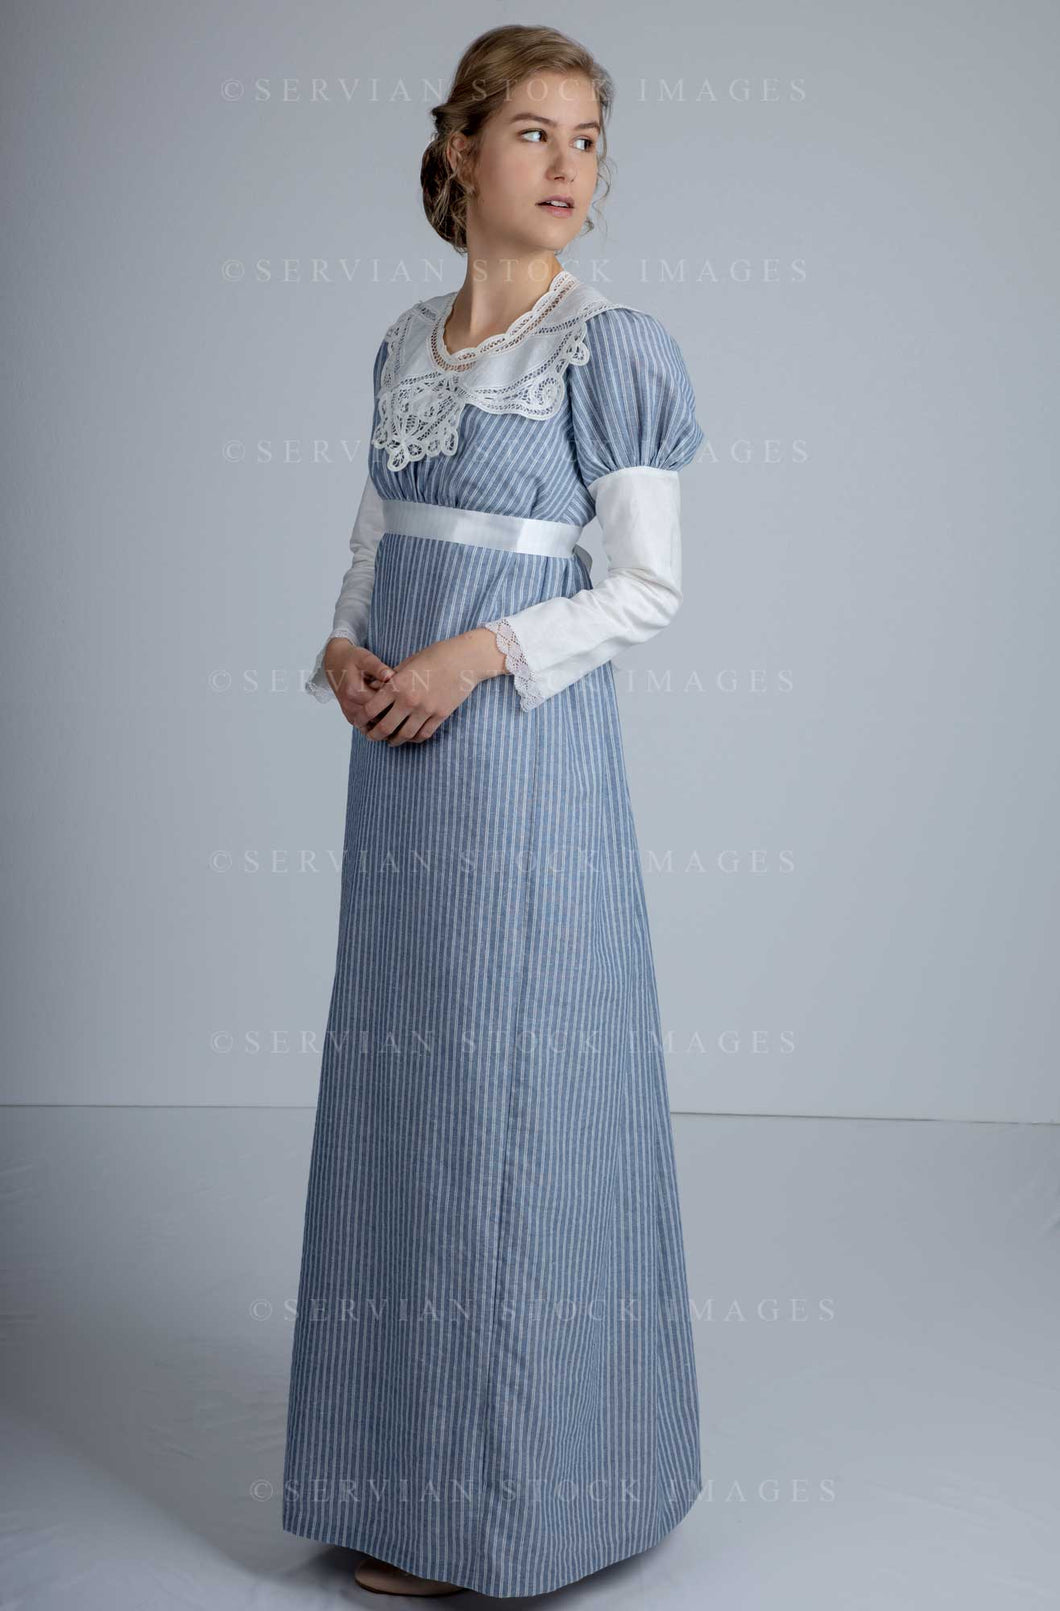 Regency woman in a striped cotton dress with a lace collar (Amalia 0614)